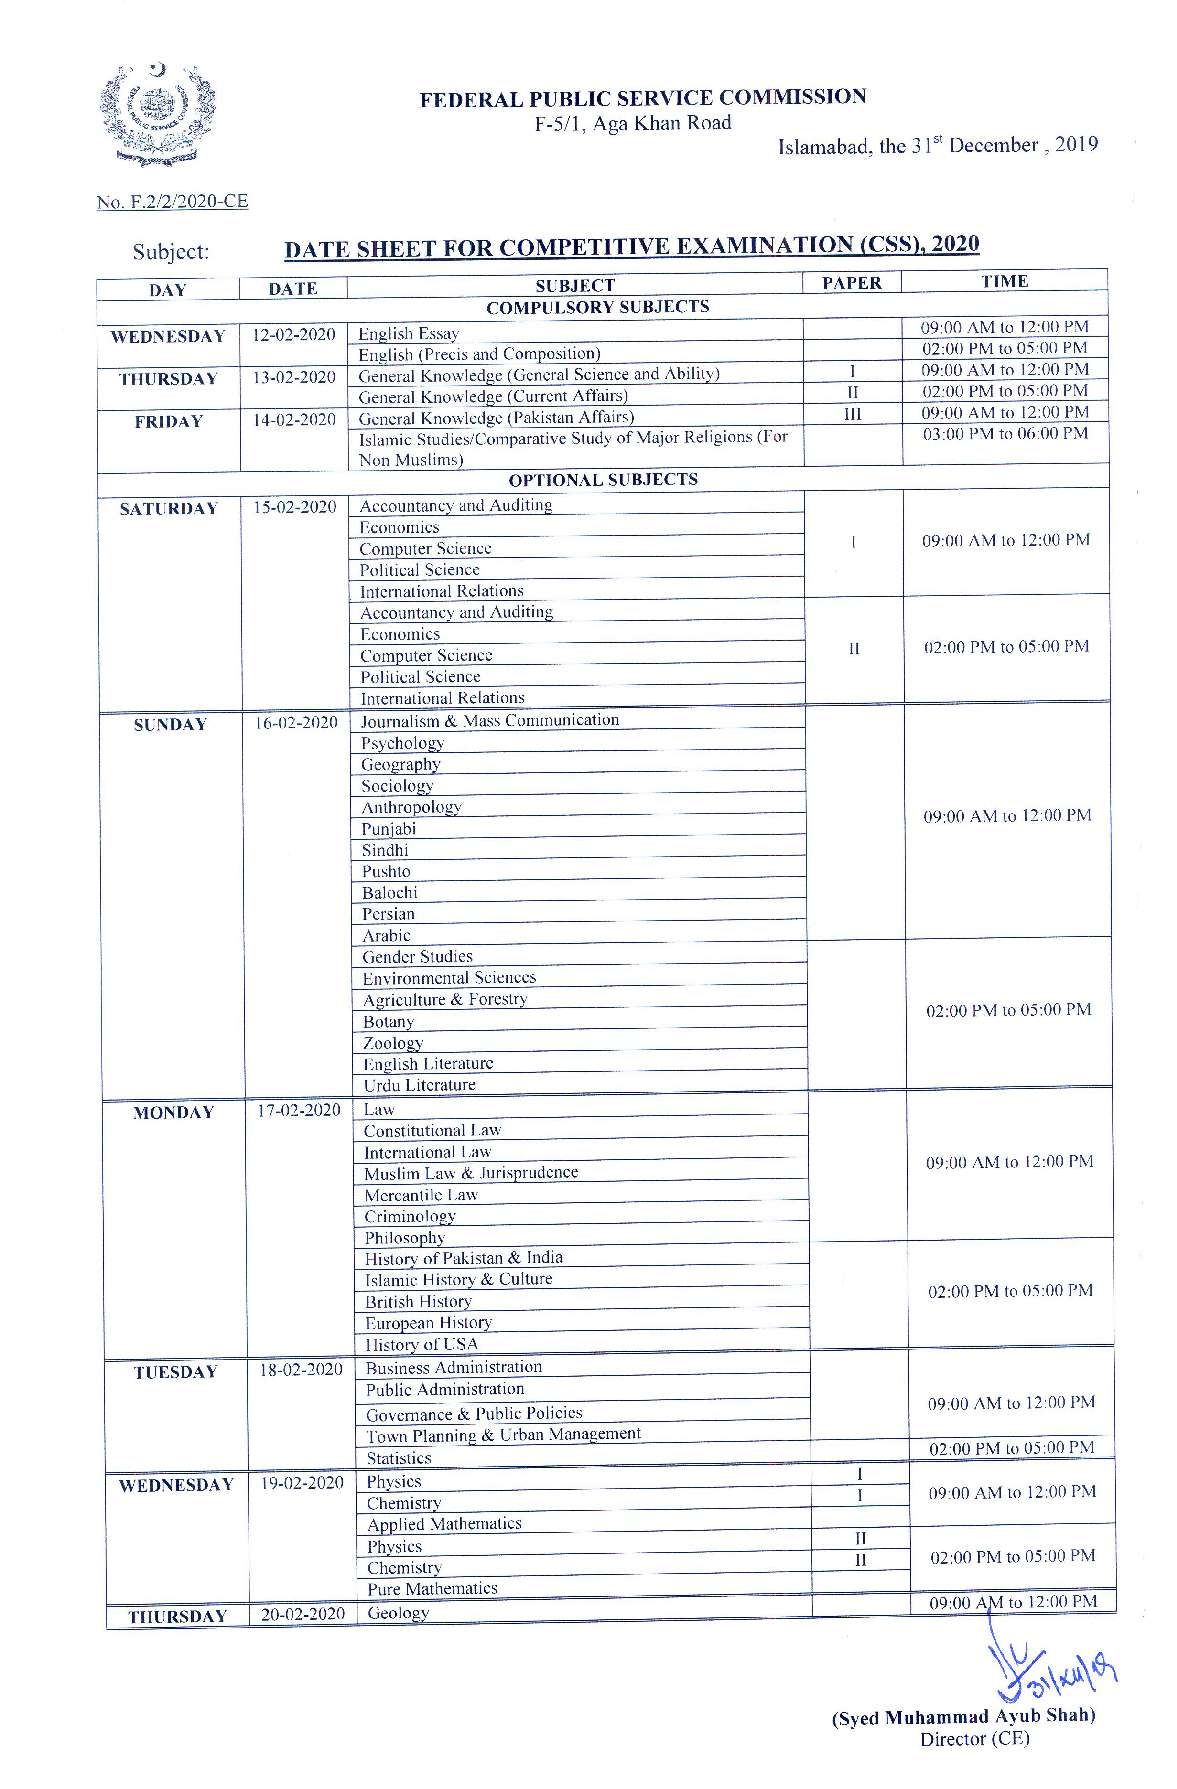 Date Sheet CSS Competitive Examination 2020